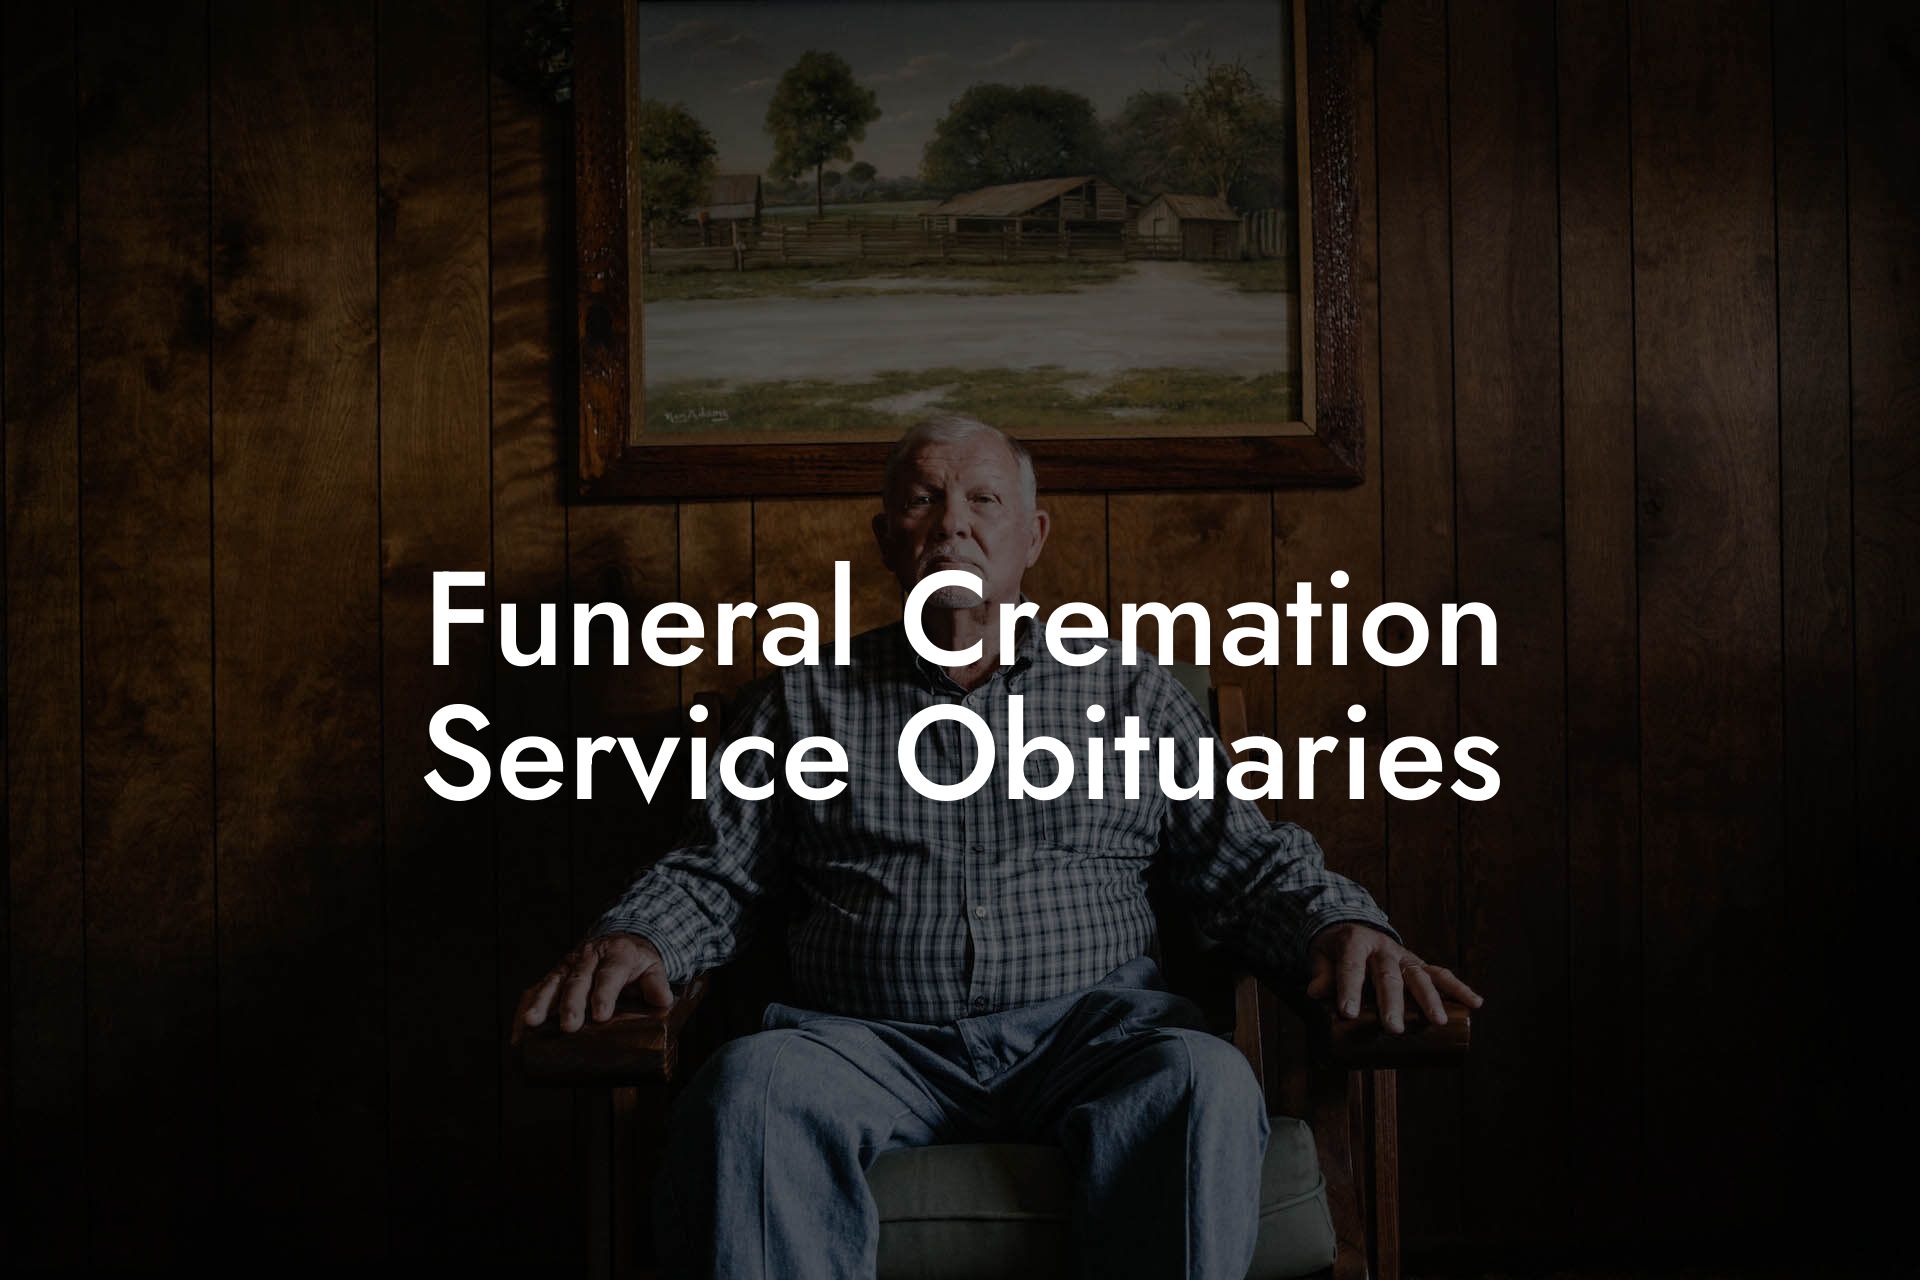 Funeral Cremation Service Obituaries